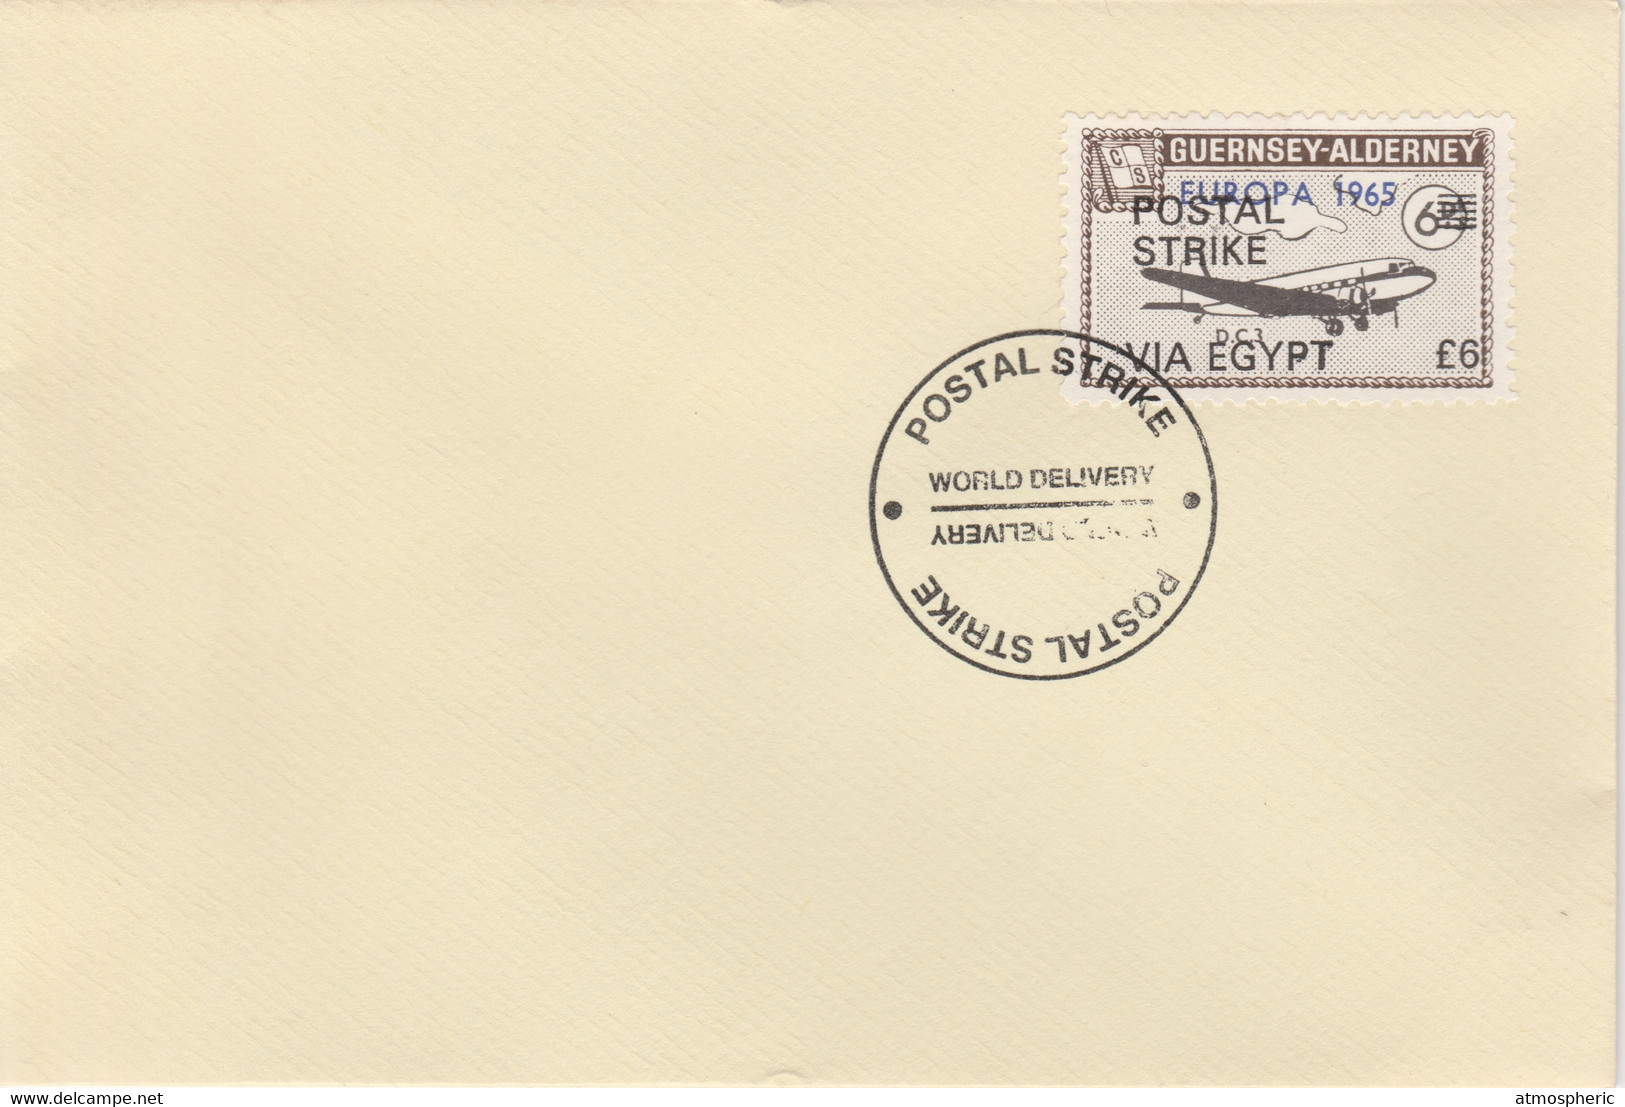 Guernsey - Alderney 1971 Postal Strike Cover To Egypt Bearing DC-3 6d Overprinted Europa 1965 - Unclassified